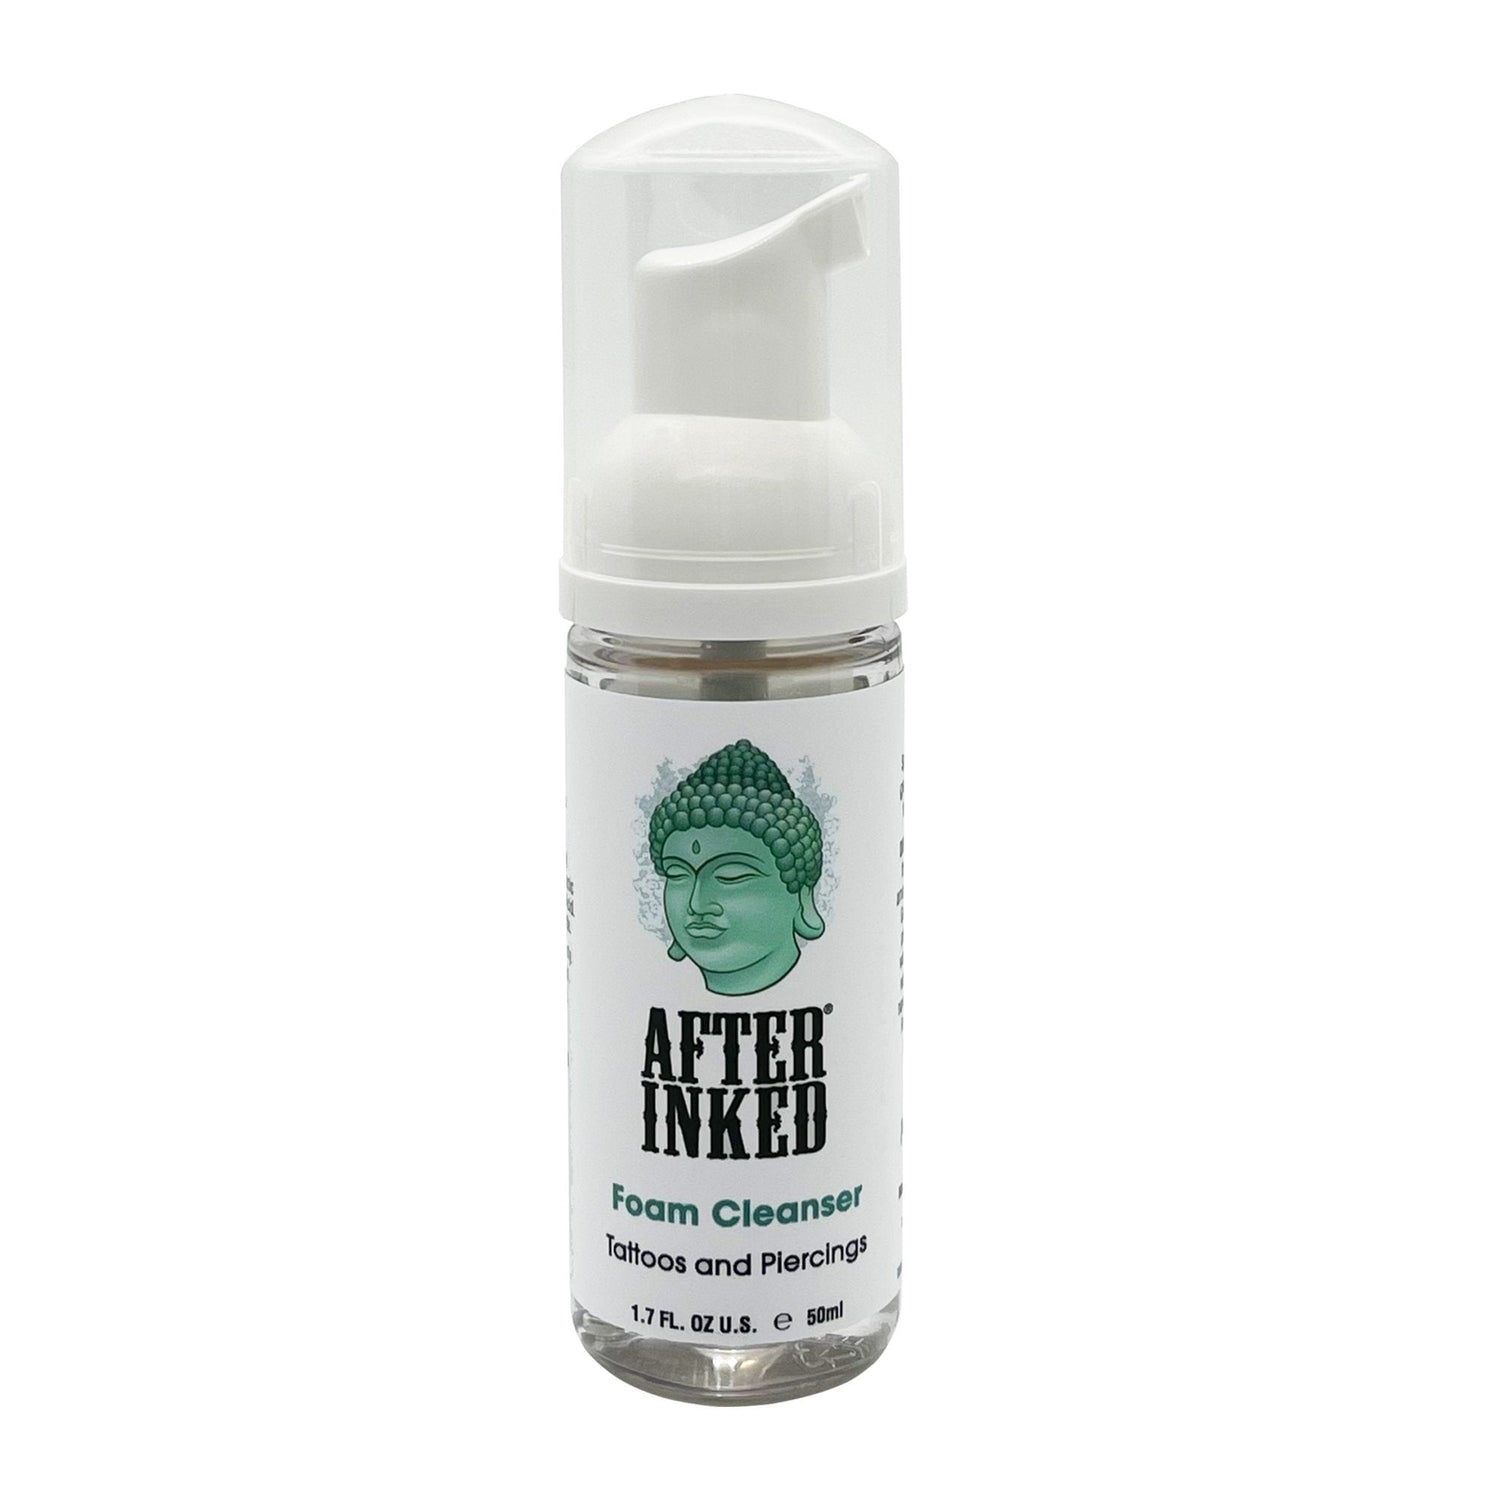 Ink Seal Foam Cleanser for Tattoos and Piercings